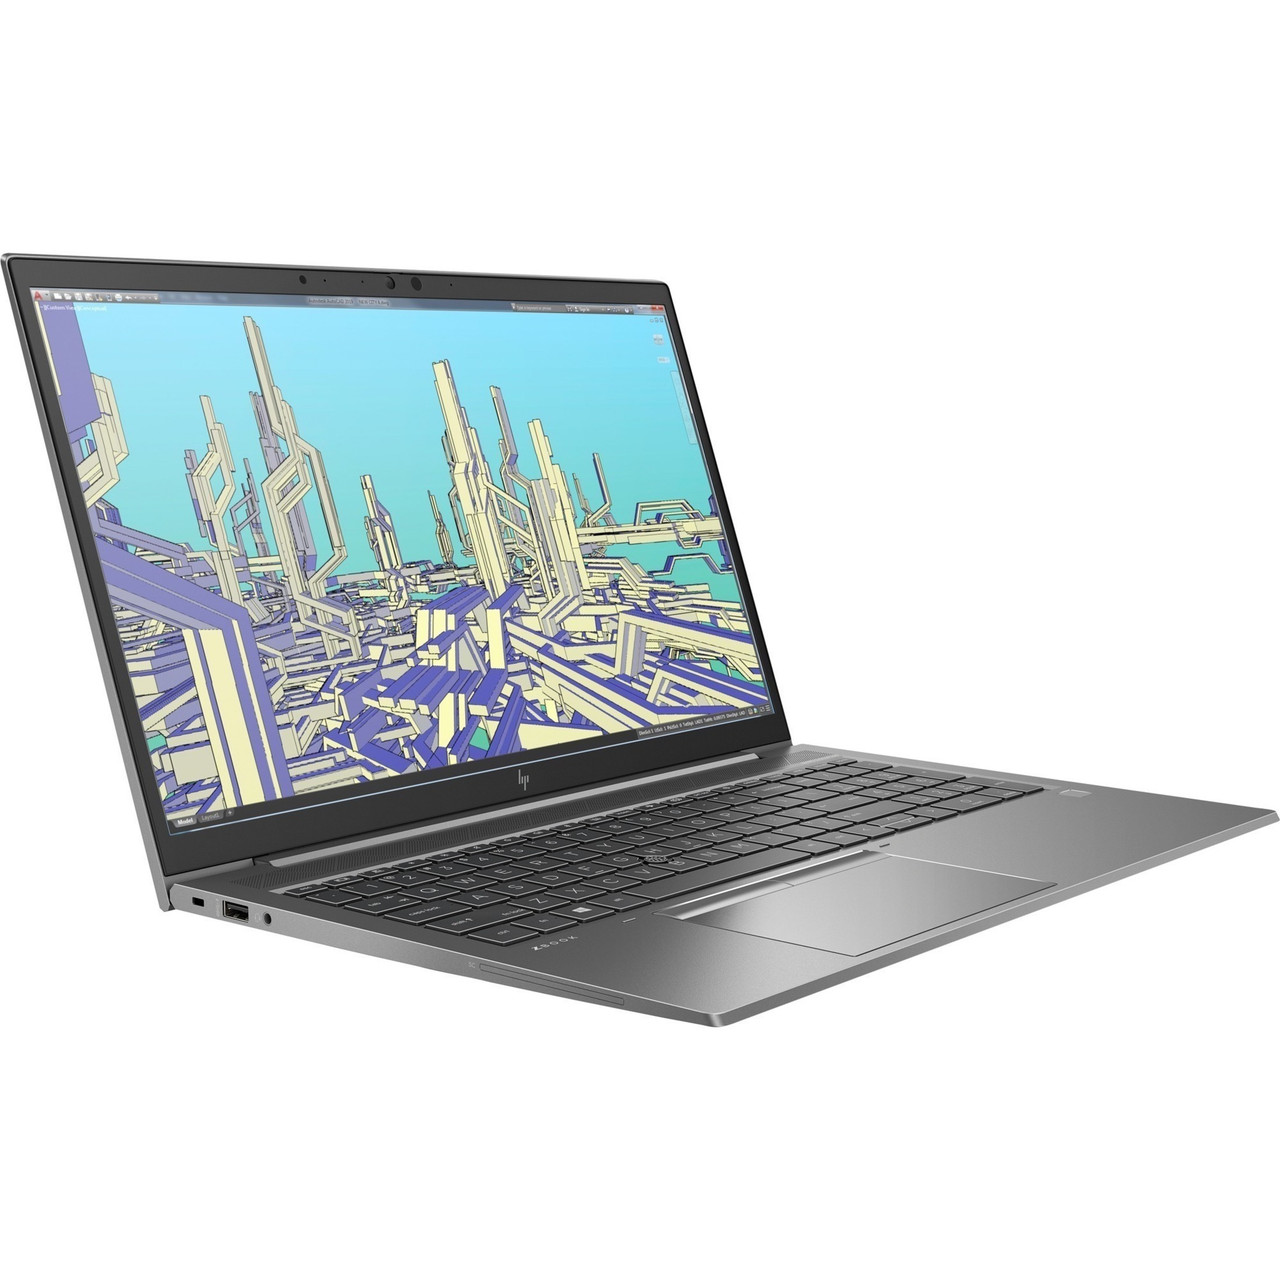 HP ZBook Firefly 15 G8 15.6" Mobile Workstation - Intel Core i7 11th Gen i7-1185G7 Quad-core (4 Core) 3 GHz - 16 GB Total RAM - 256 GB SSD